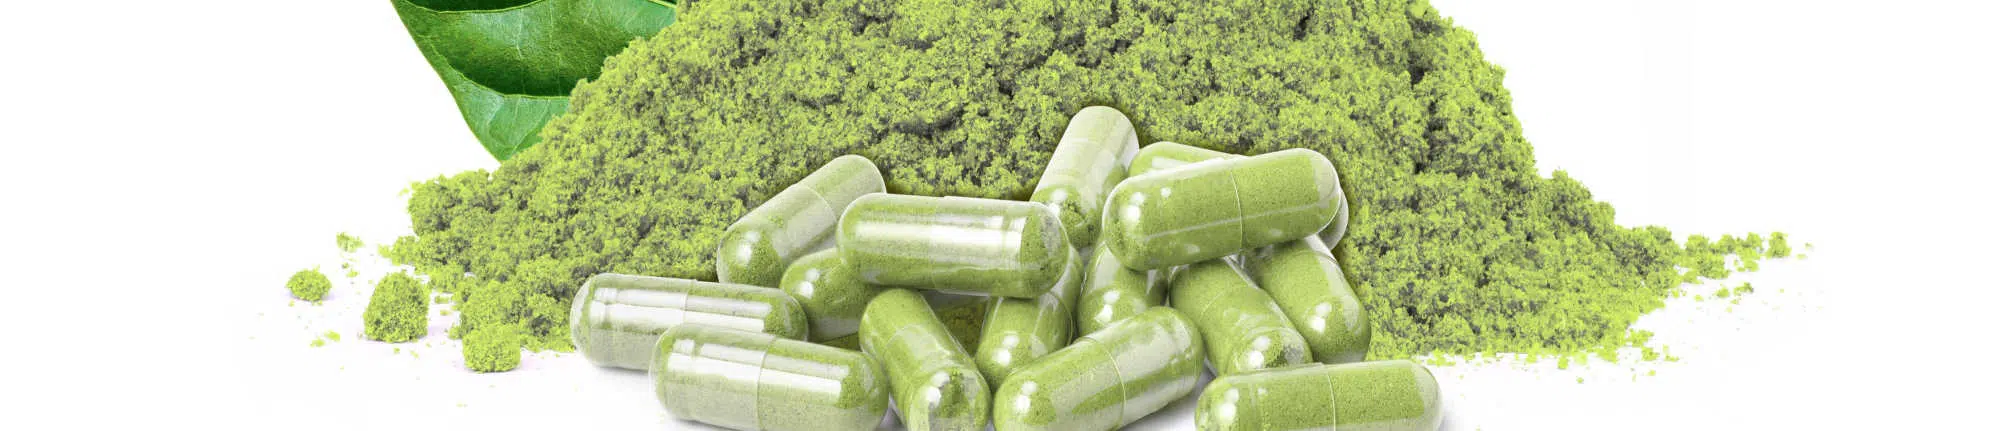 image of whole herbs kratom powder and capsules